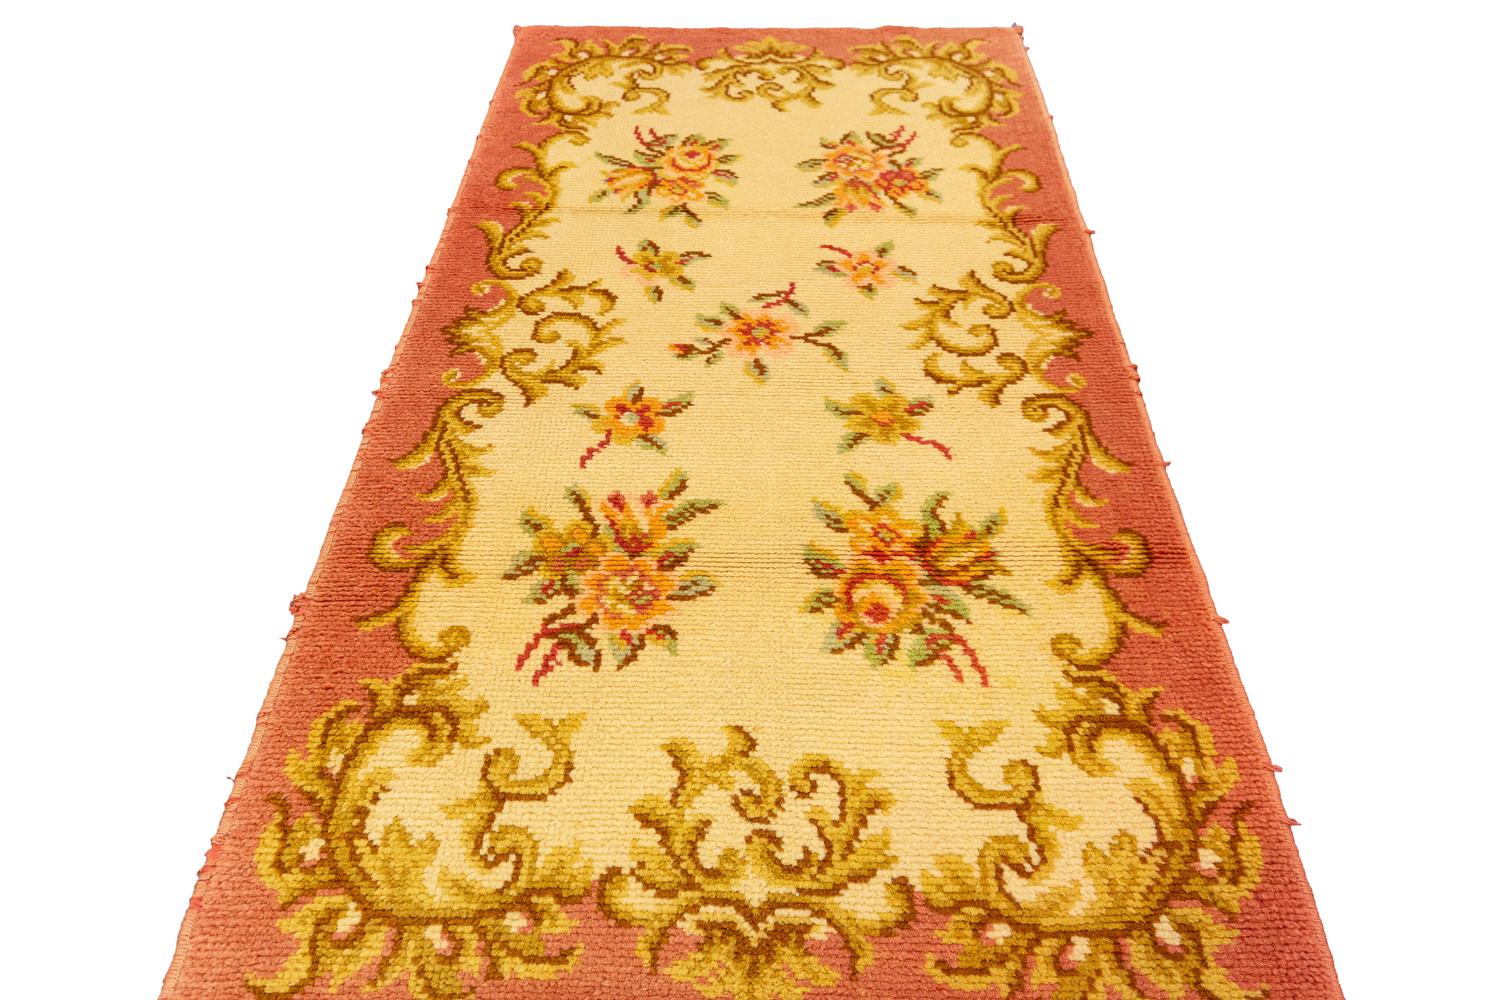 This is a vintage European rug woven during the mid-20th century circa 1950 and measures 141 x 72CM in size. It has a highly classical European drawing with golden-colored curling leaves which create a border and in close a highly spacious all-over